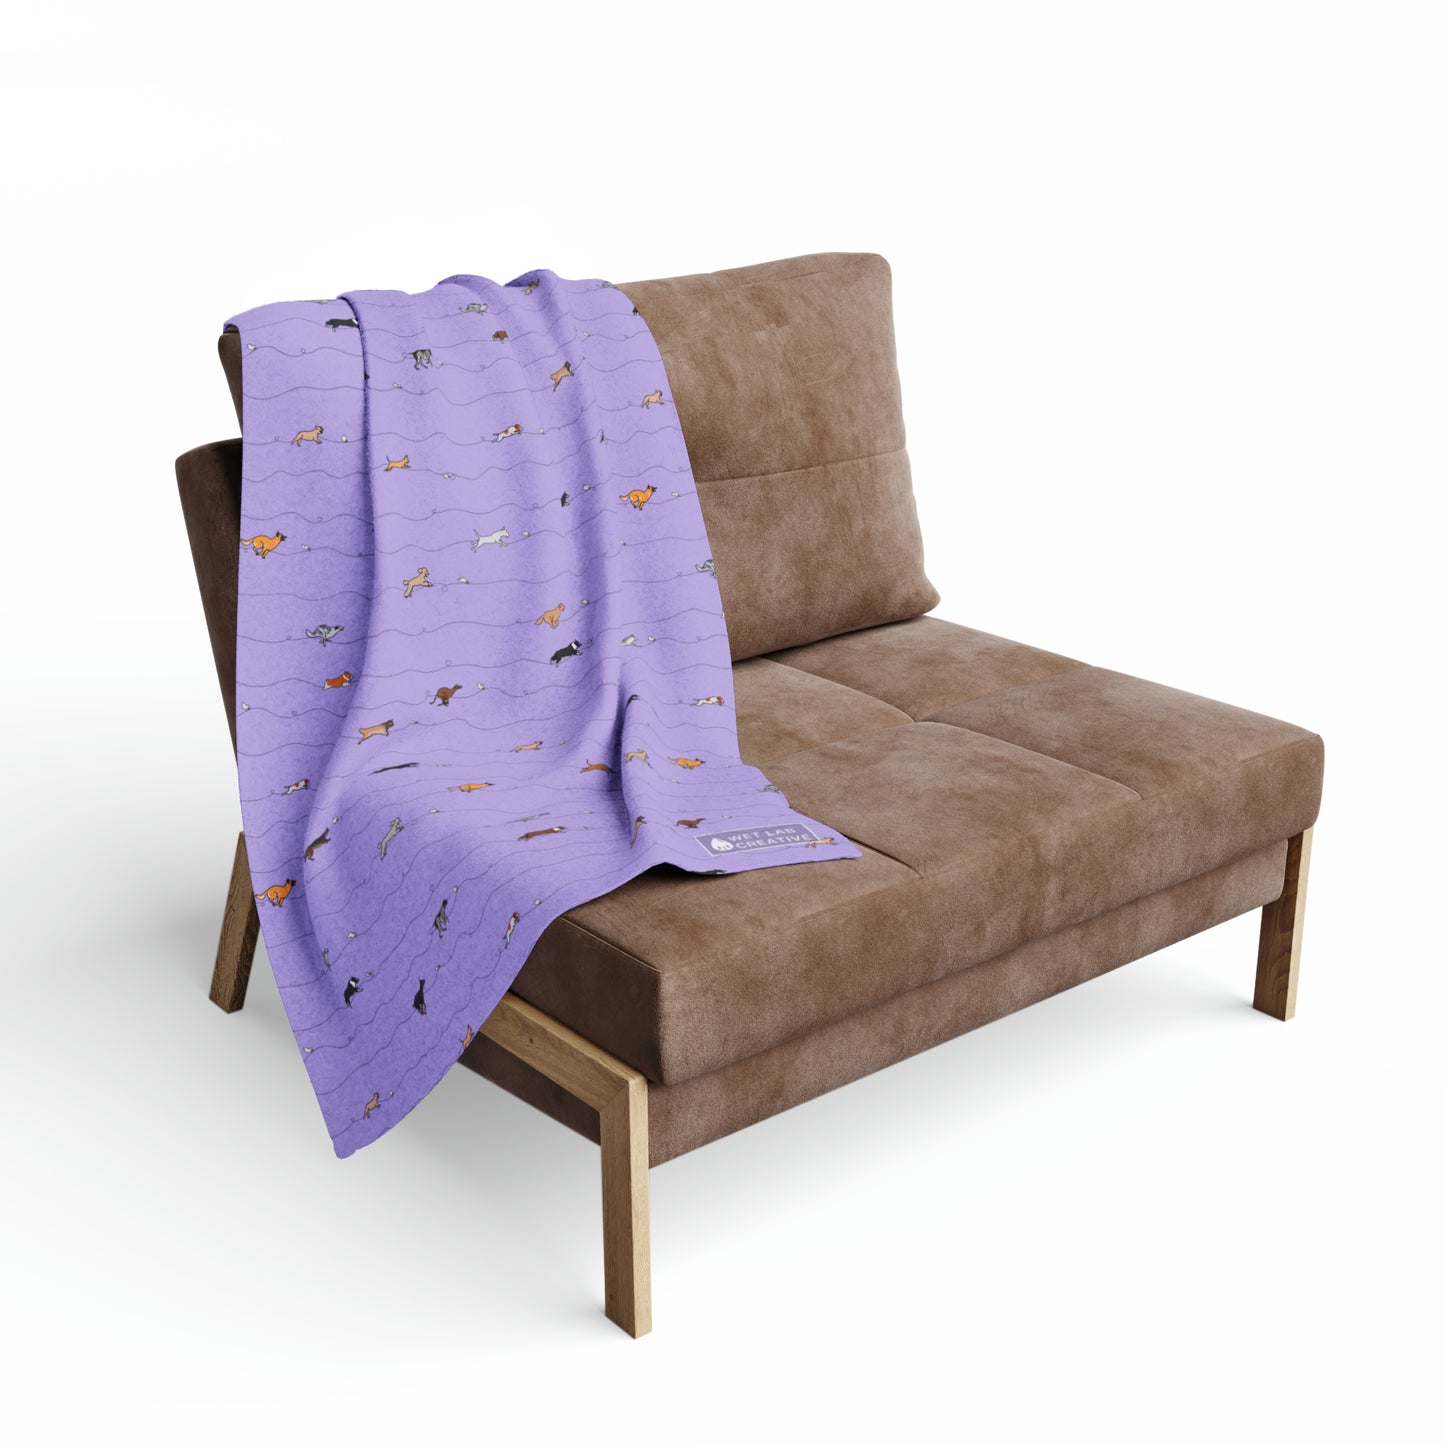 FastCat Lure Coursing Arctic Fleece Blanket in Lavender Teal Navy and Gray